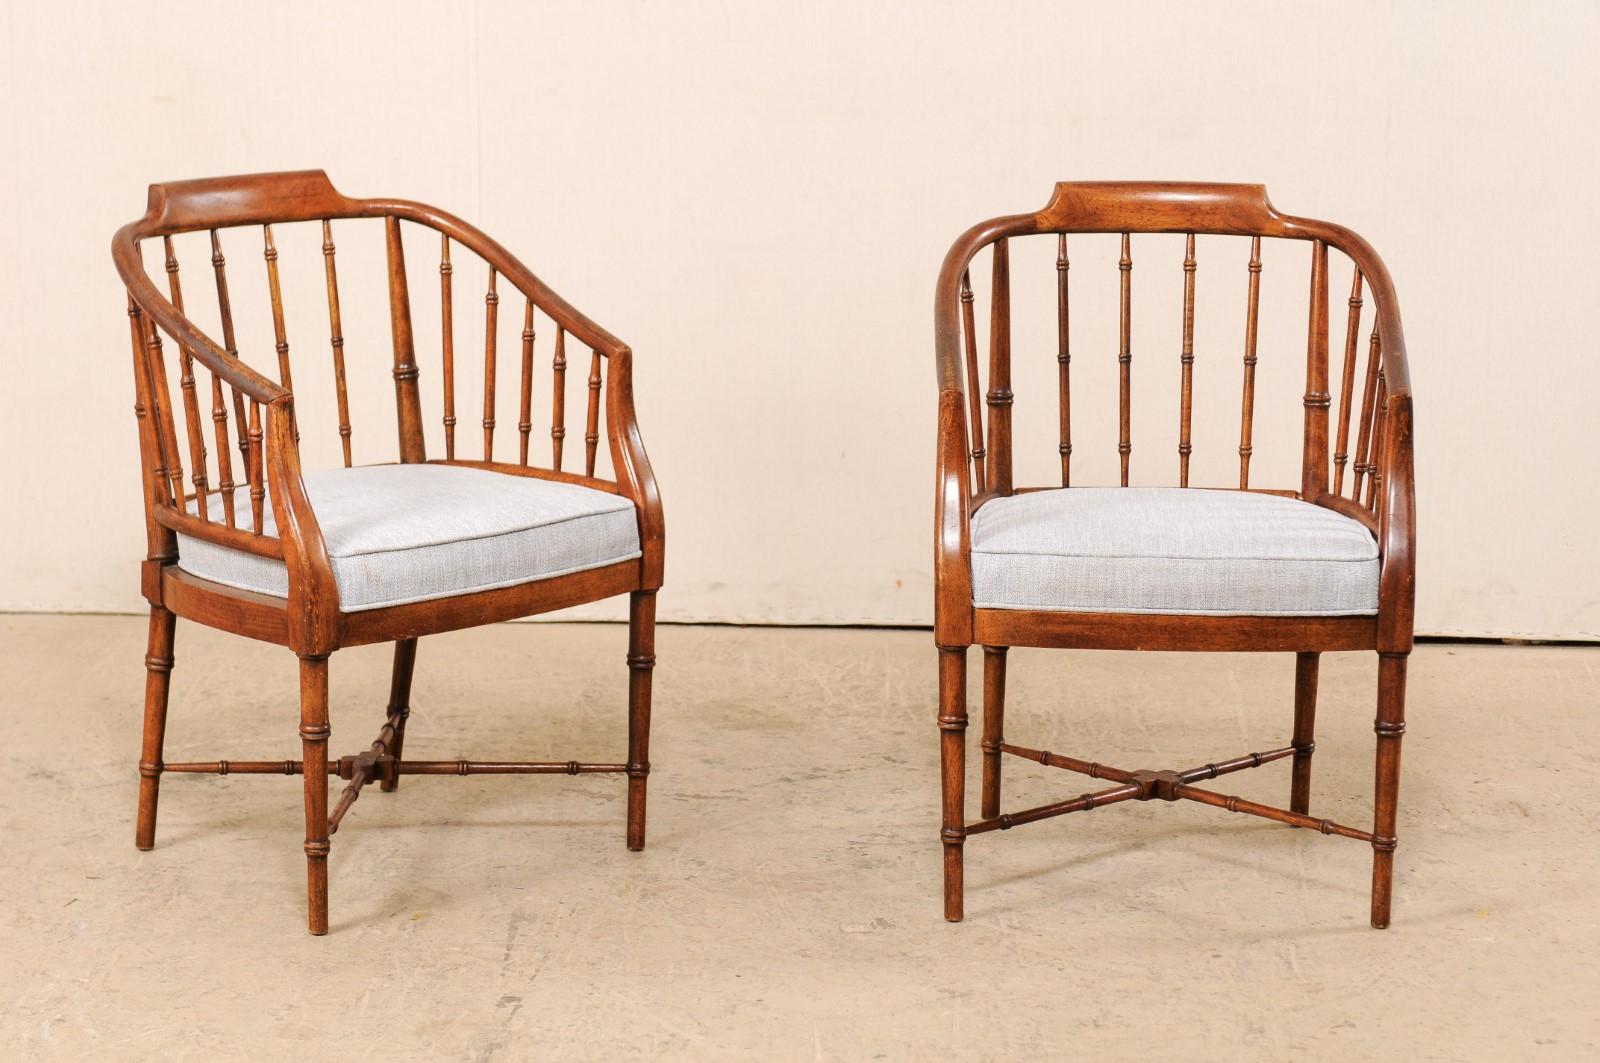 A pair of midcentury American armchairs with upholstered seats and faux-bamboo carved frames. This vintage pair of Hollywood Regency inspired occasional chairs have an ashwood frame, which has been carved to mimic the design of bamboo. The faux